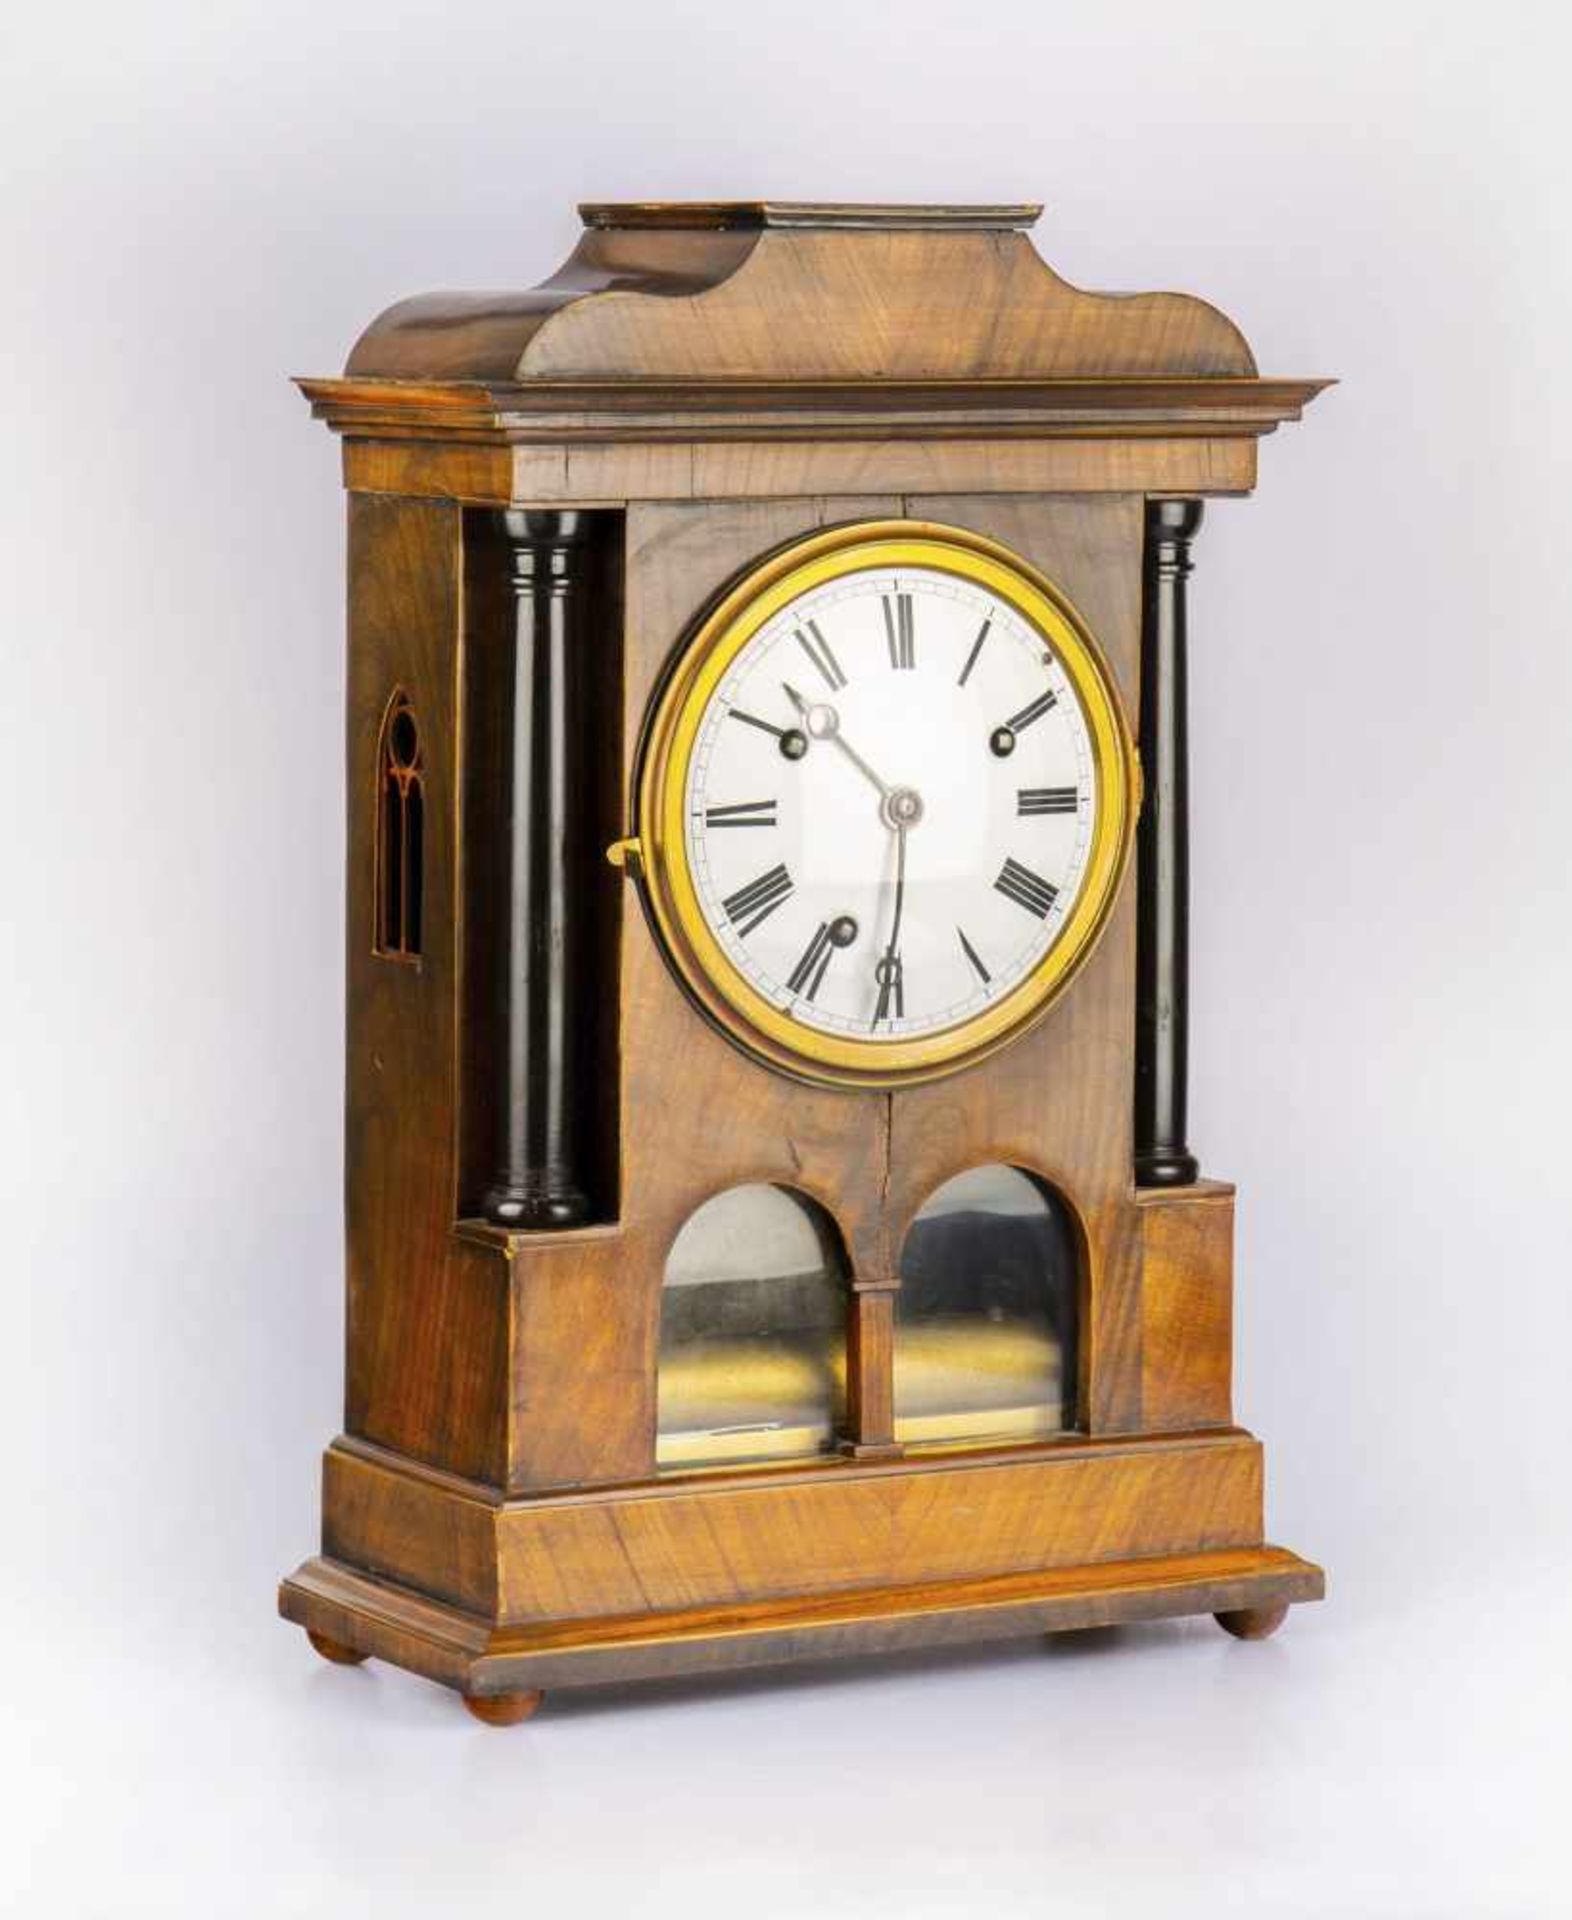 Chimney clock with roller mechanism - Image 2 of 3